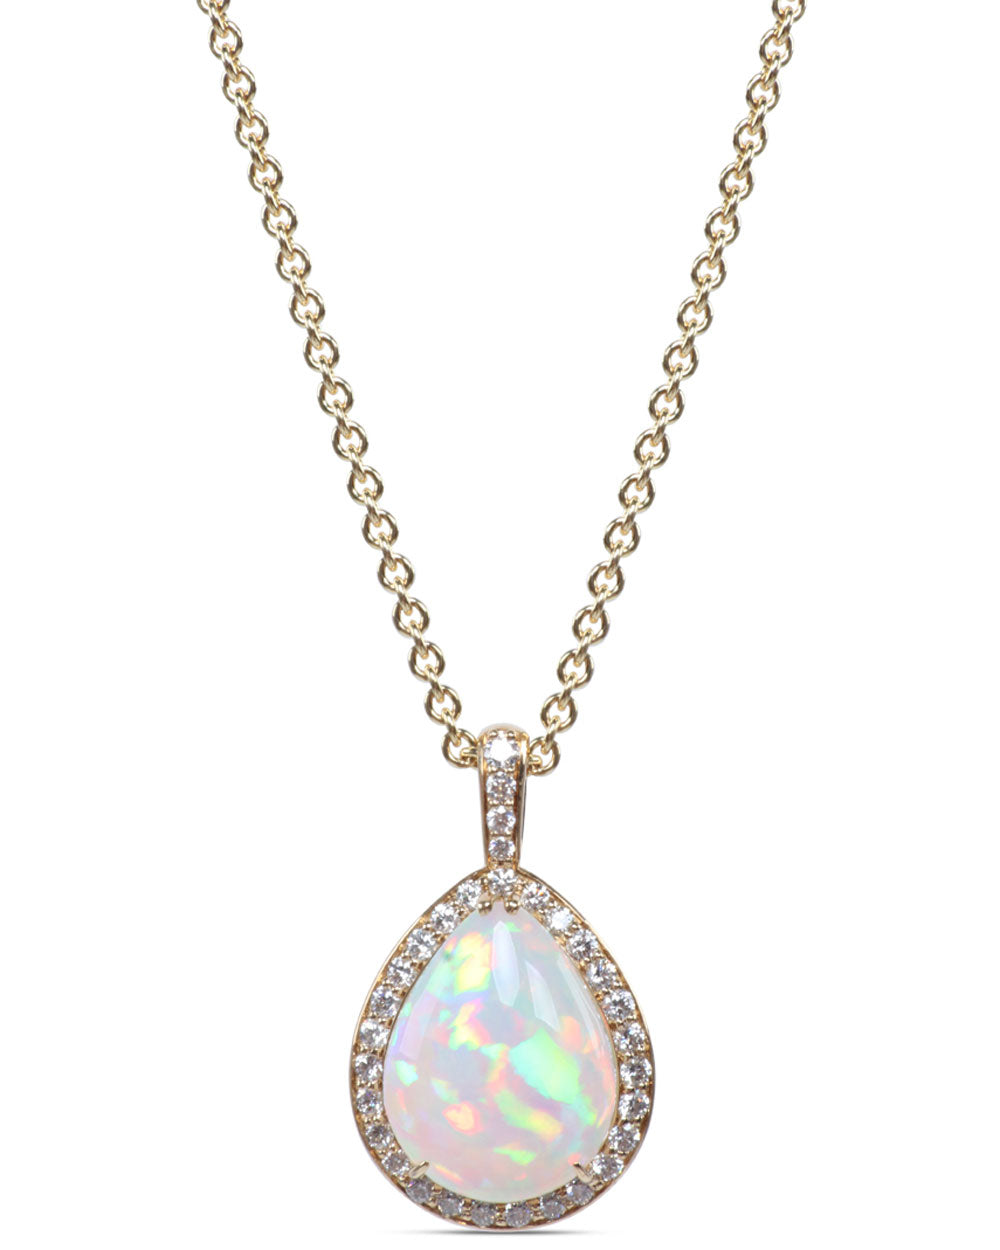 Opal and Diamond Pear Shaped Pendant Necklace